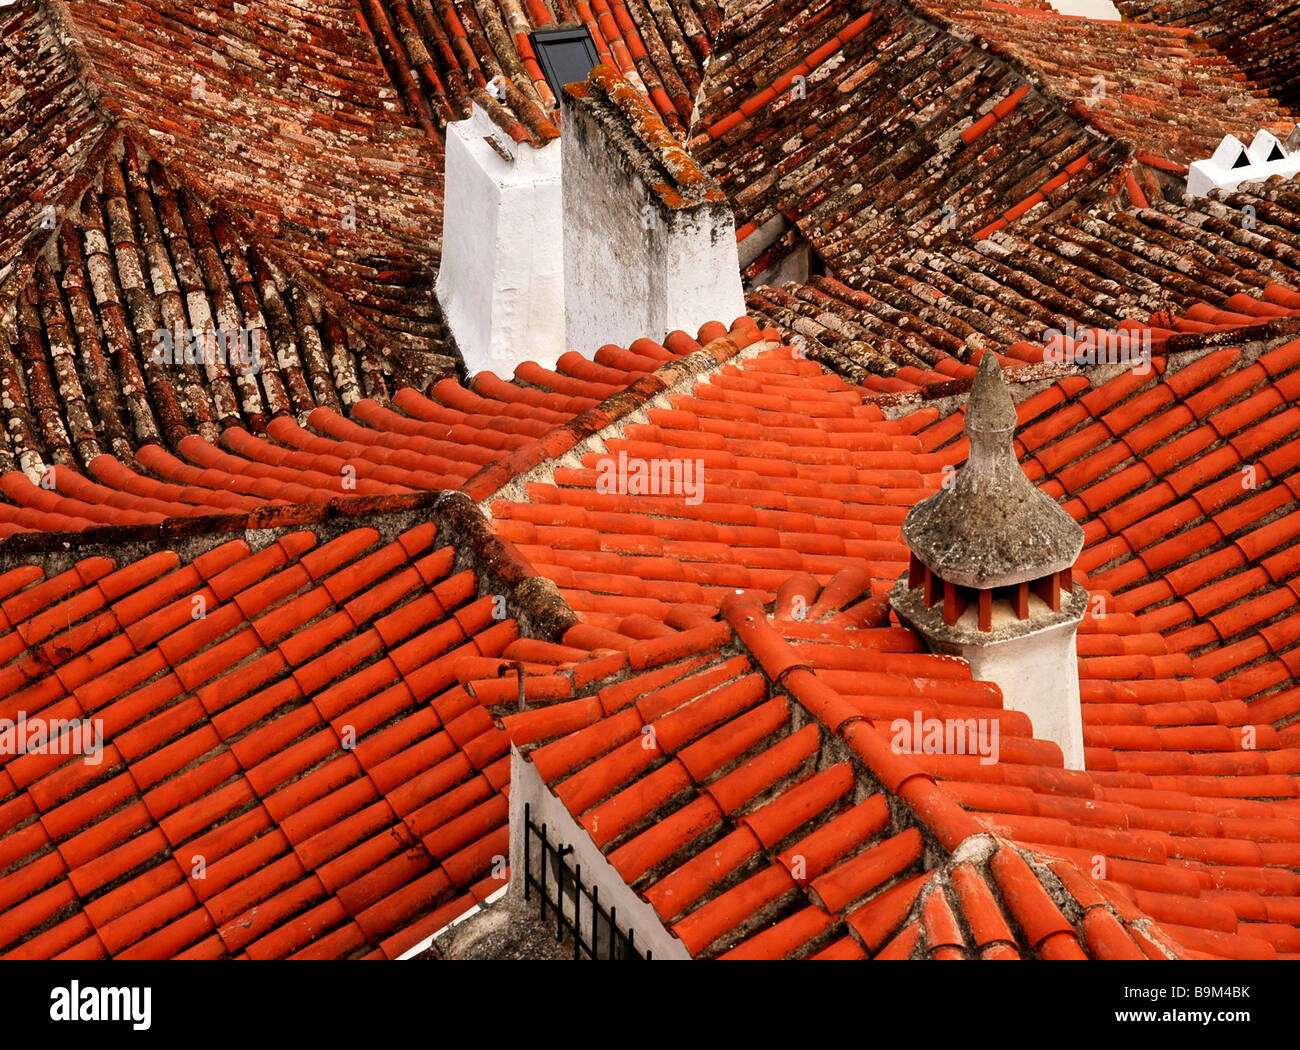 Detail of red tiled roofs and chimneys of houses in the medieval town of Obidos, Portugal. Stock Photo